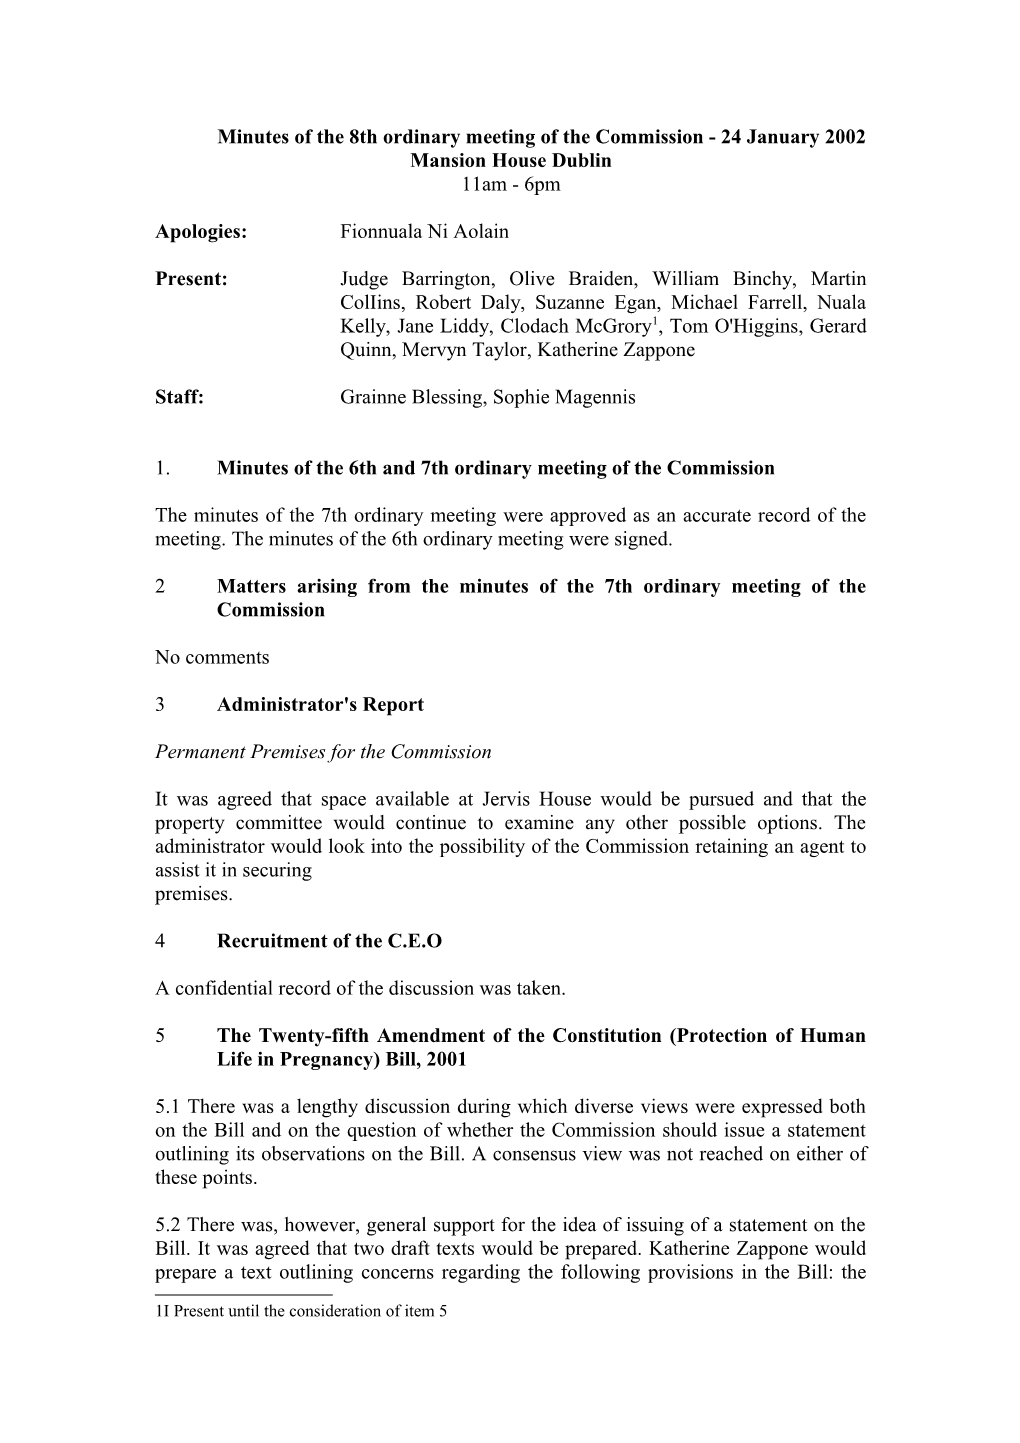 Minutes of the 8Th Ordinary Meeting of the Commission - 24 January 2002 Mansion House Dublin